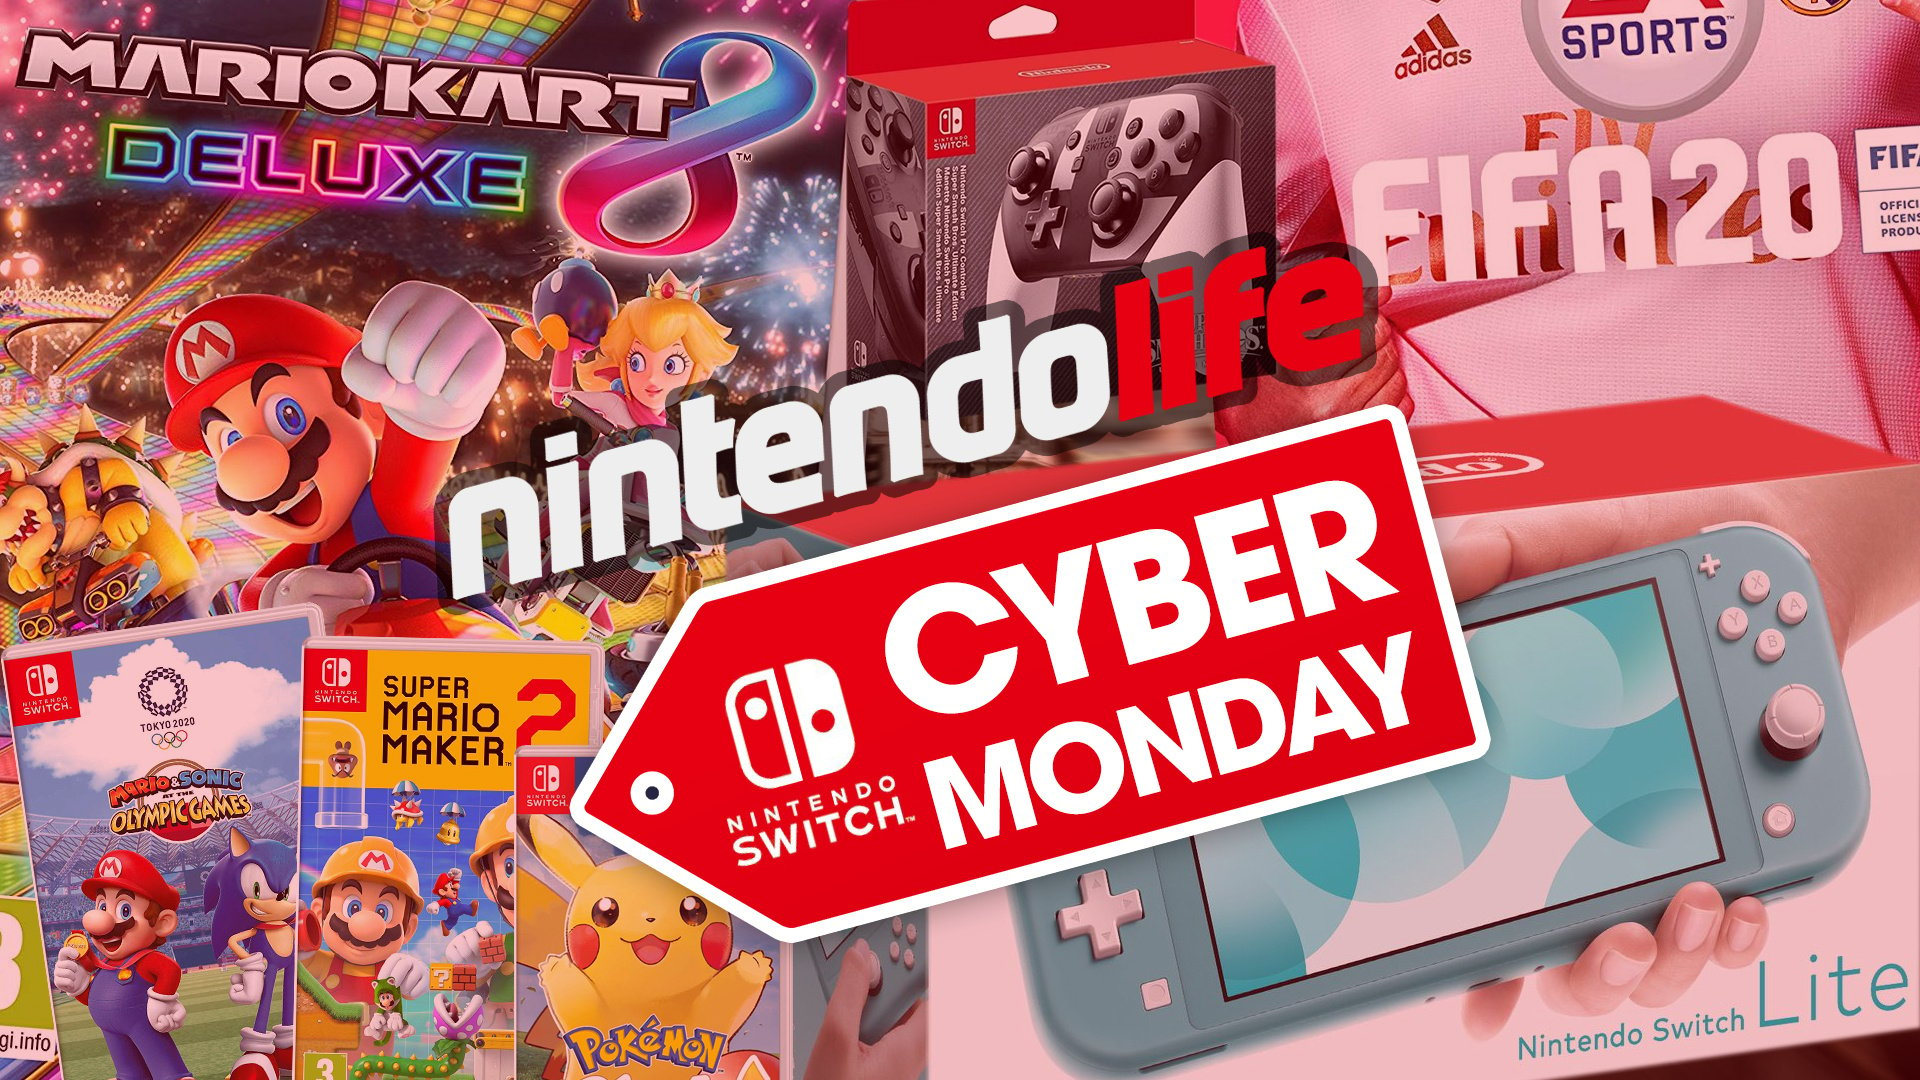 Nintendo Switch Cyber Monday And Black Friday Deals 2019: Console - Will There Be More Switch Deals On Black Friday